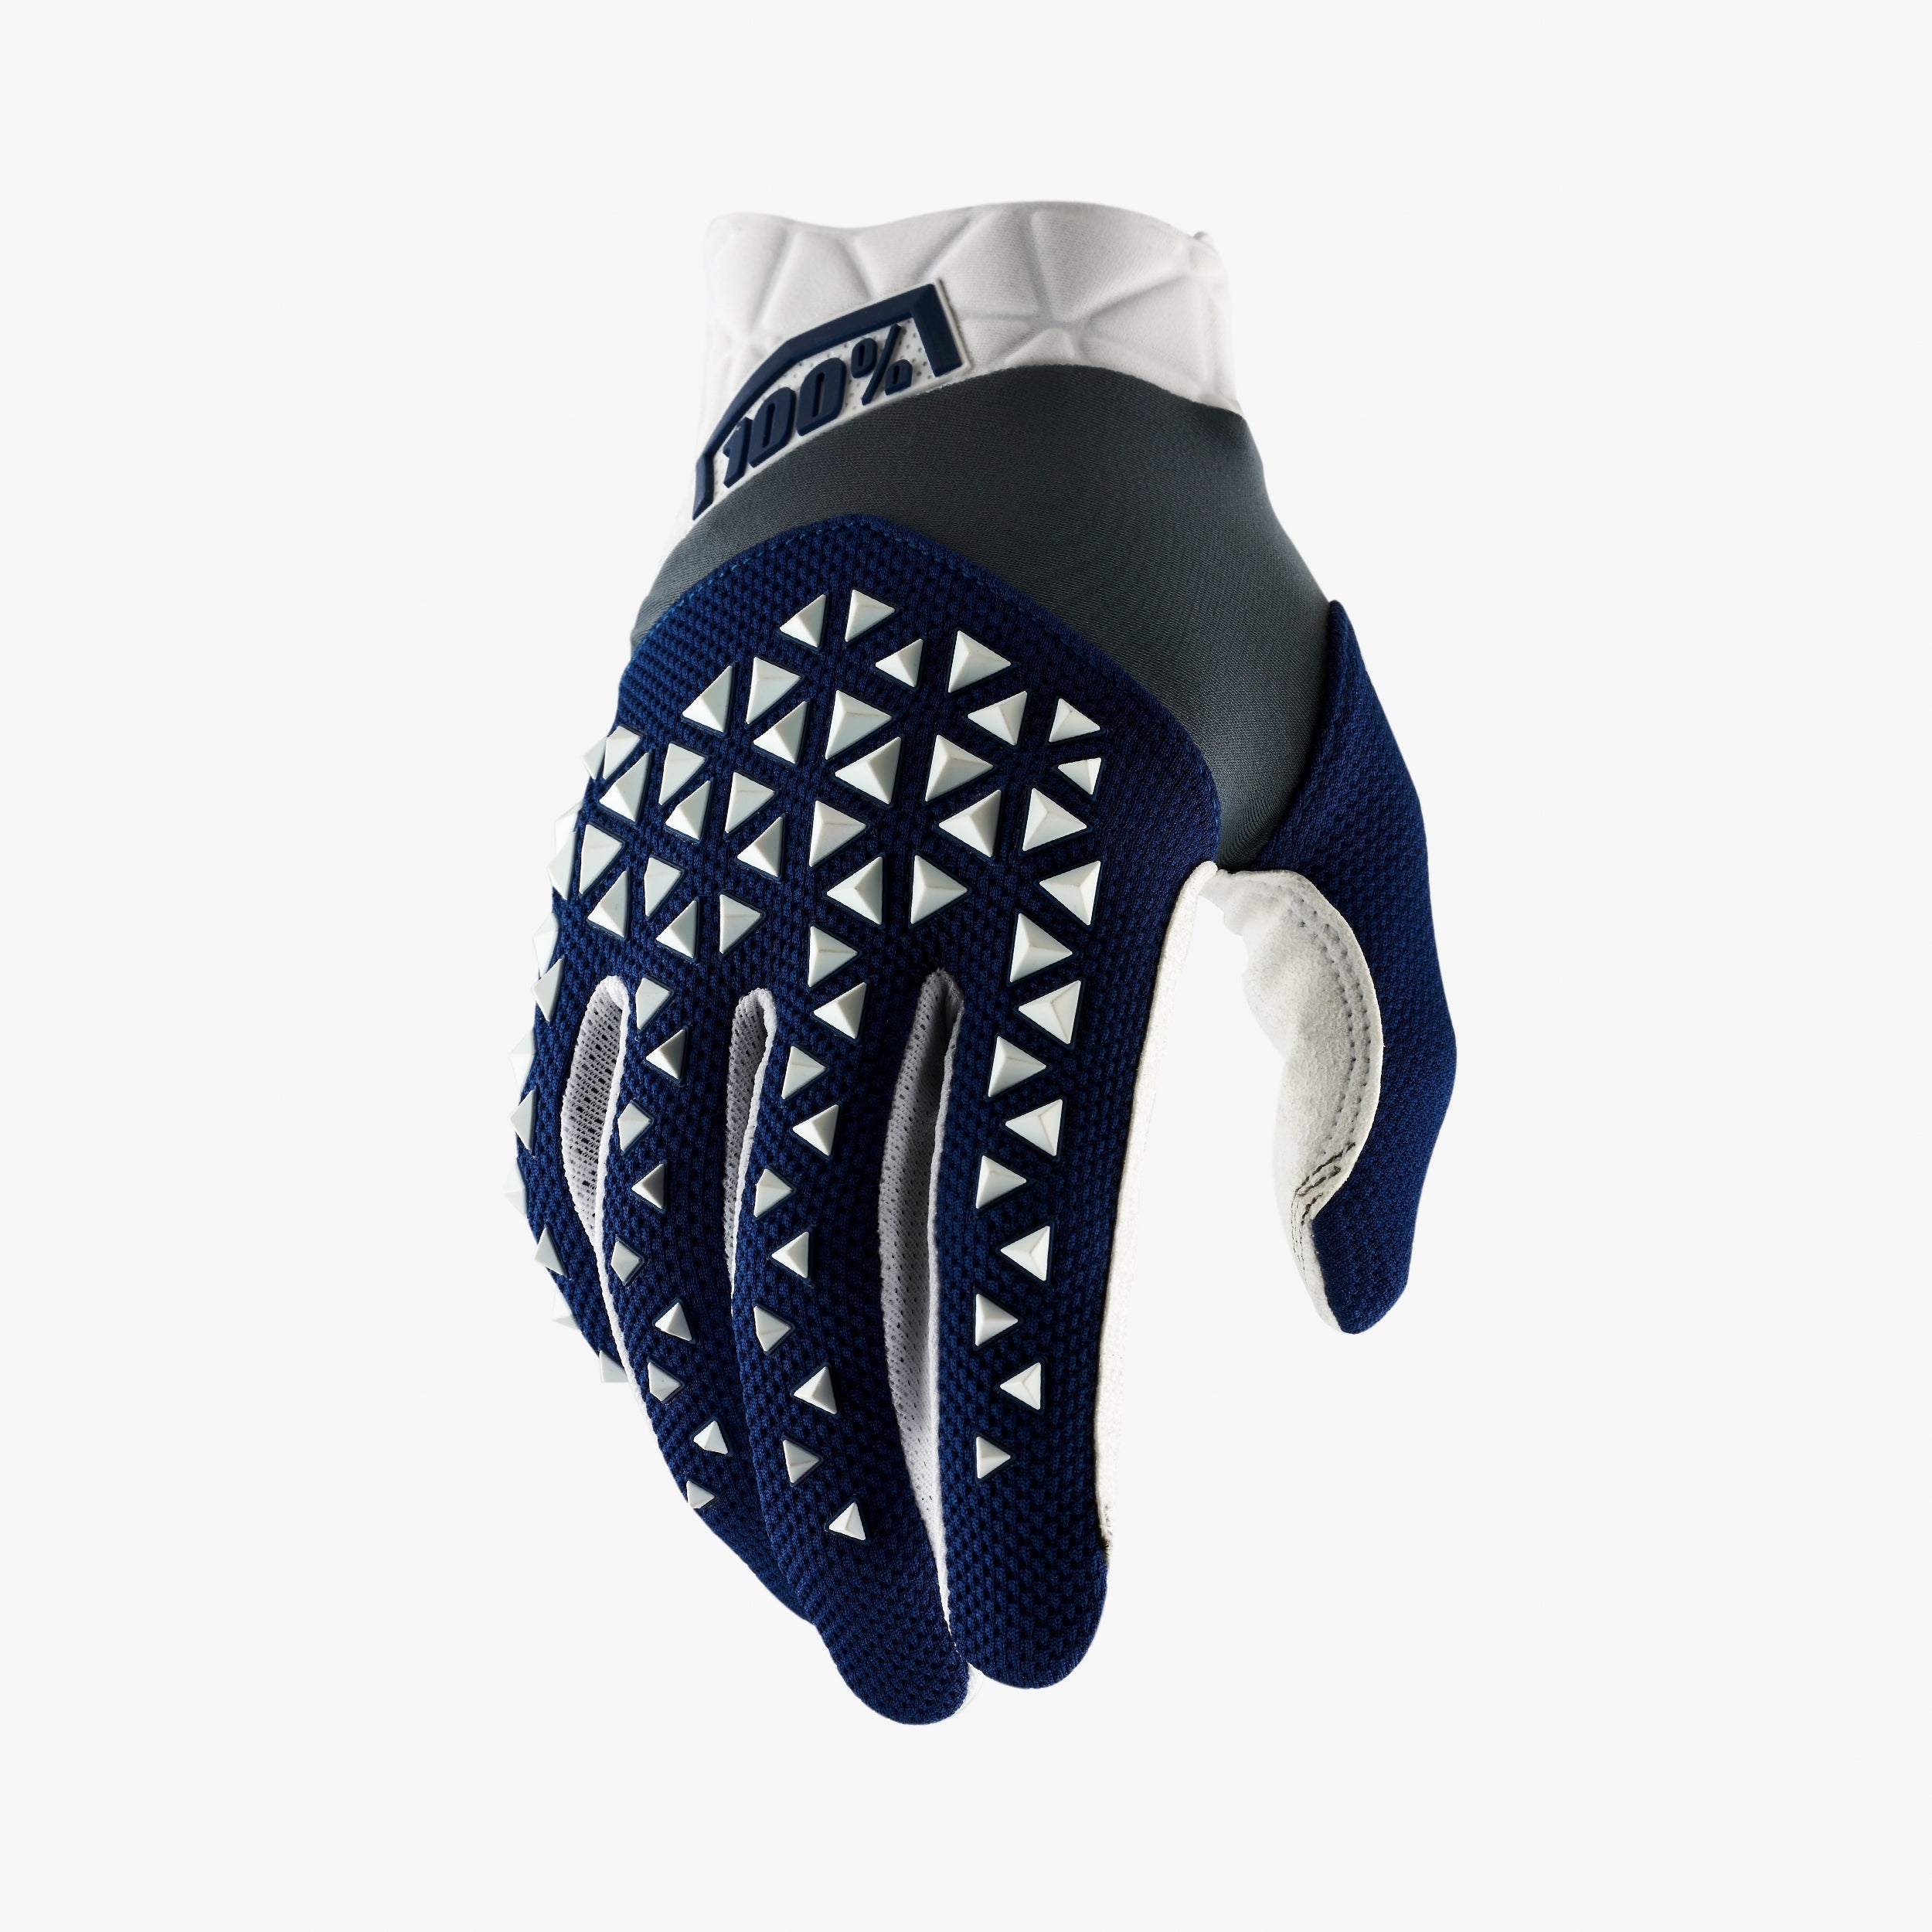 AIRMATIC Gloves Navy/Steel/White